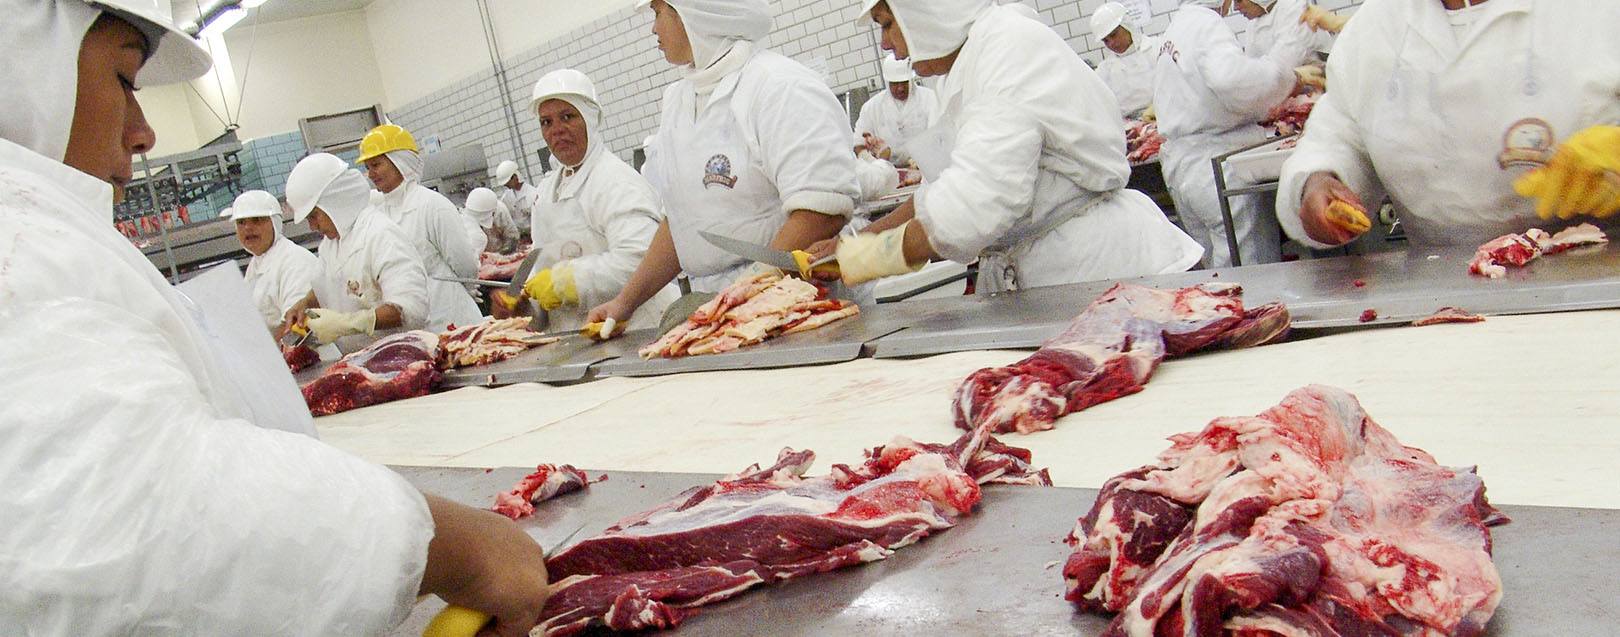 Brazil’s meat exports hit by restrictions from 4 major meat importers